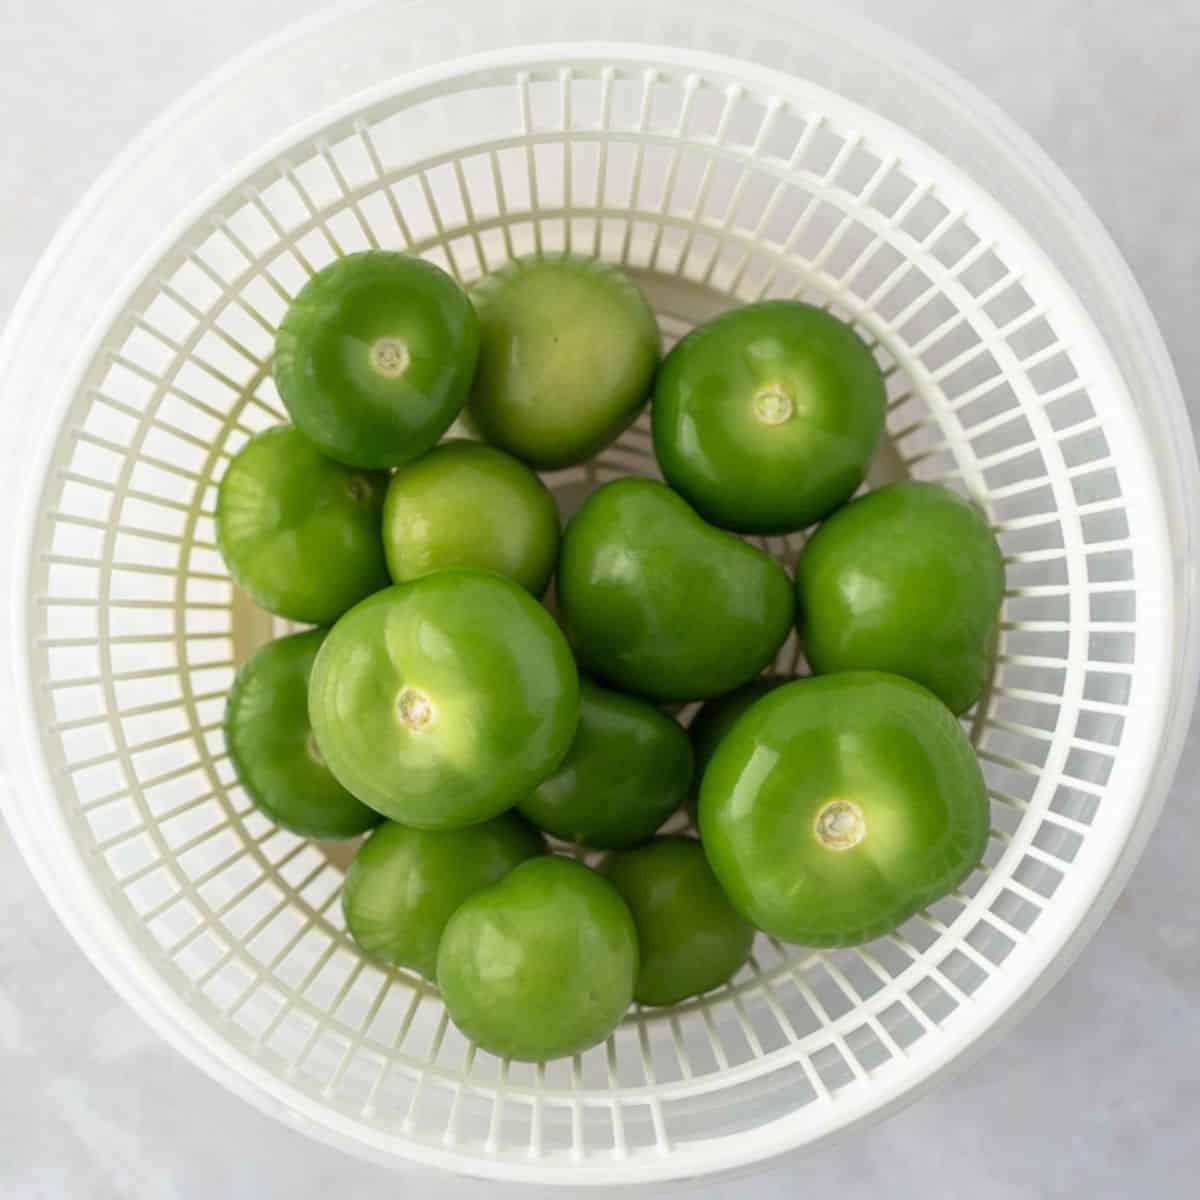 Raw tomatillos in a basket.